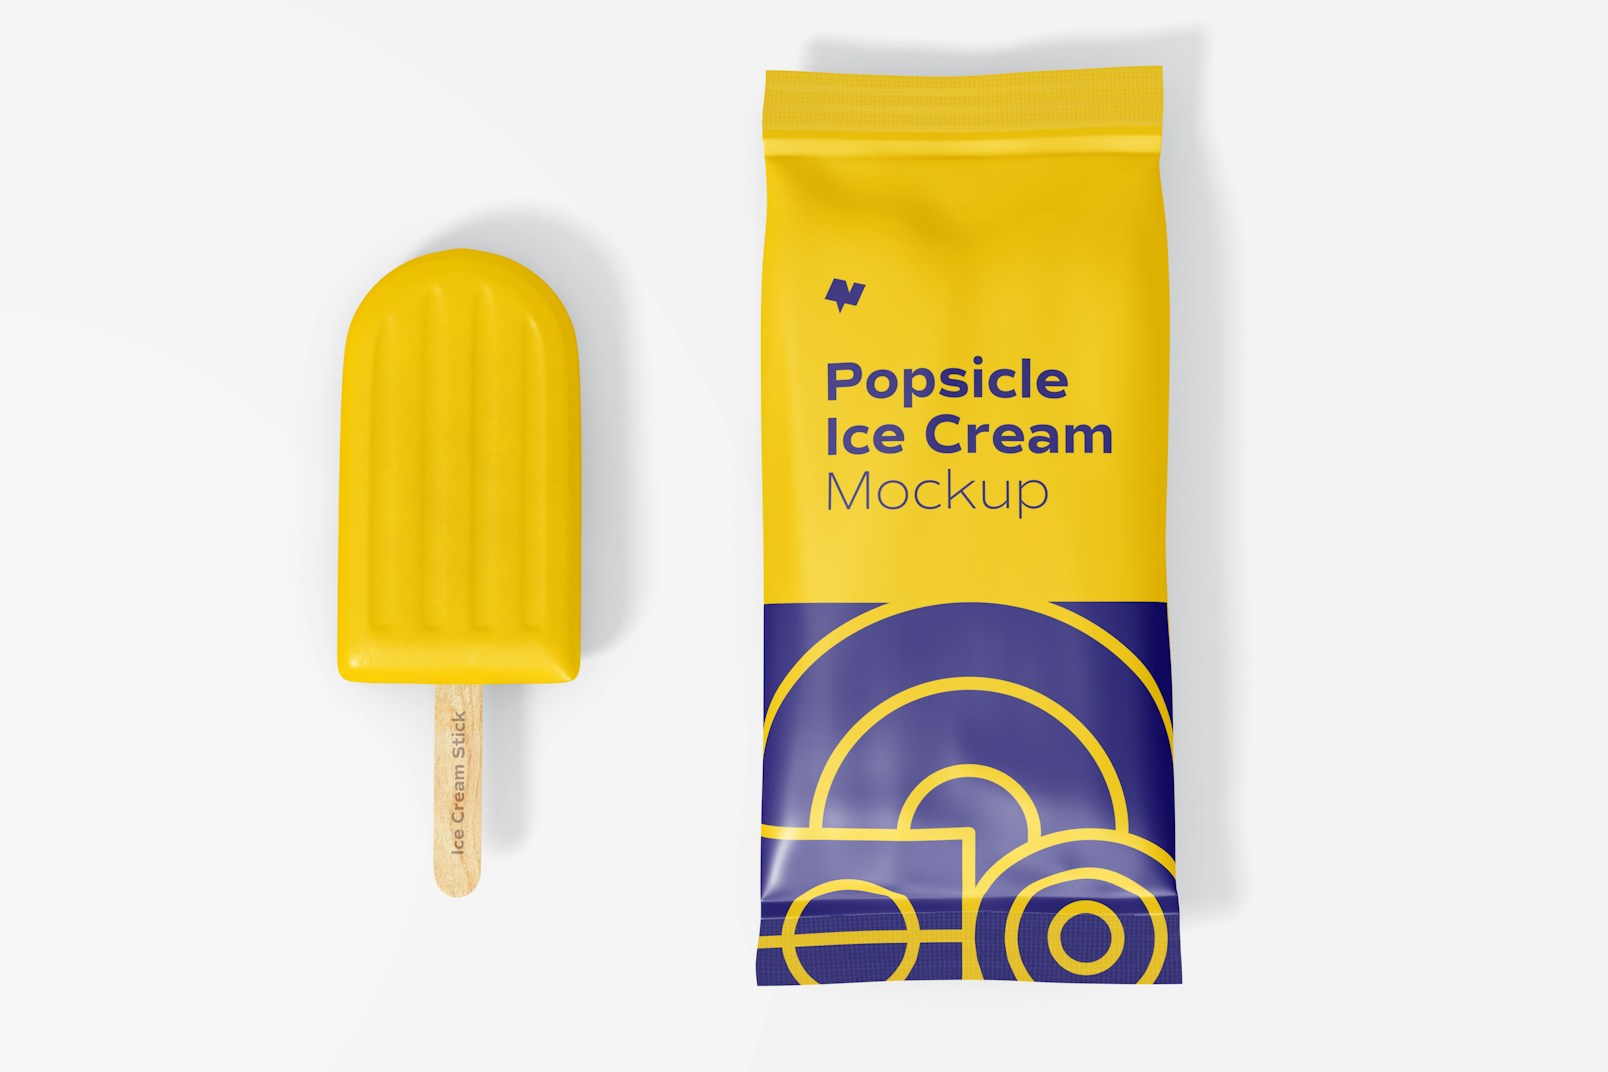 Popsicle Ice Cream Packaging Mockup, Top View